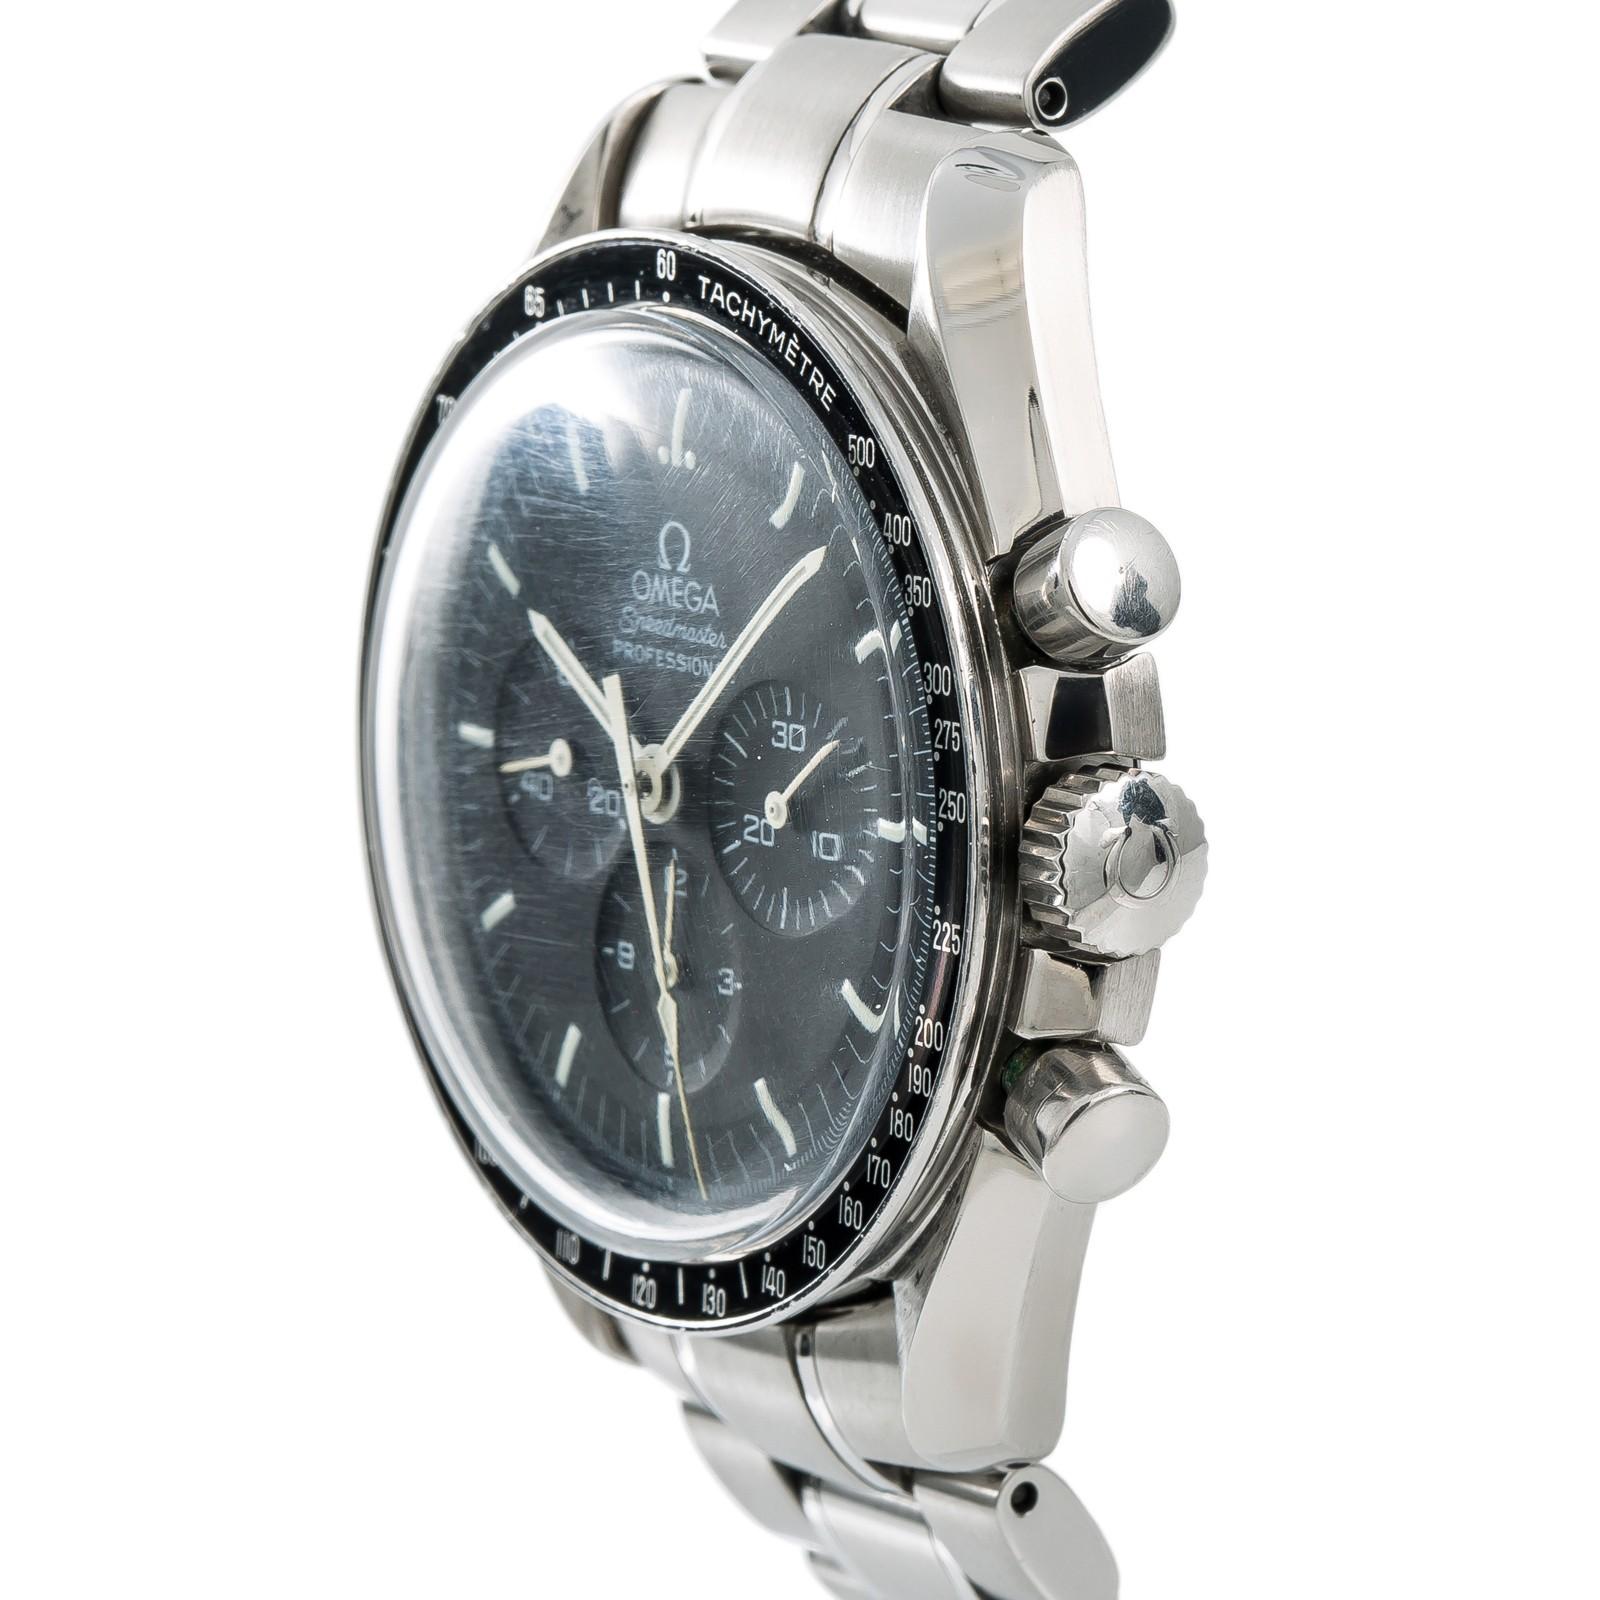 Omega Speedmaster 3573.4., Black Dial Certified Authentic For Sale 1